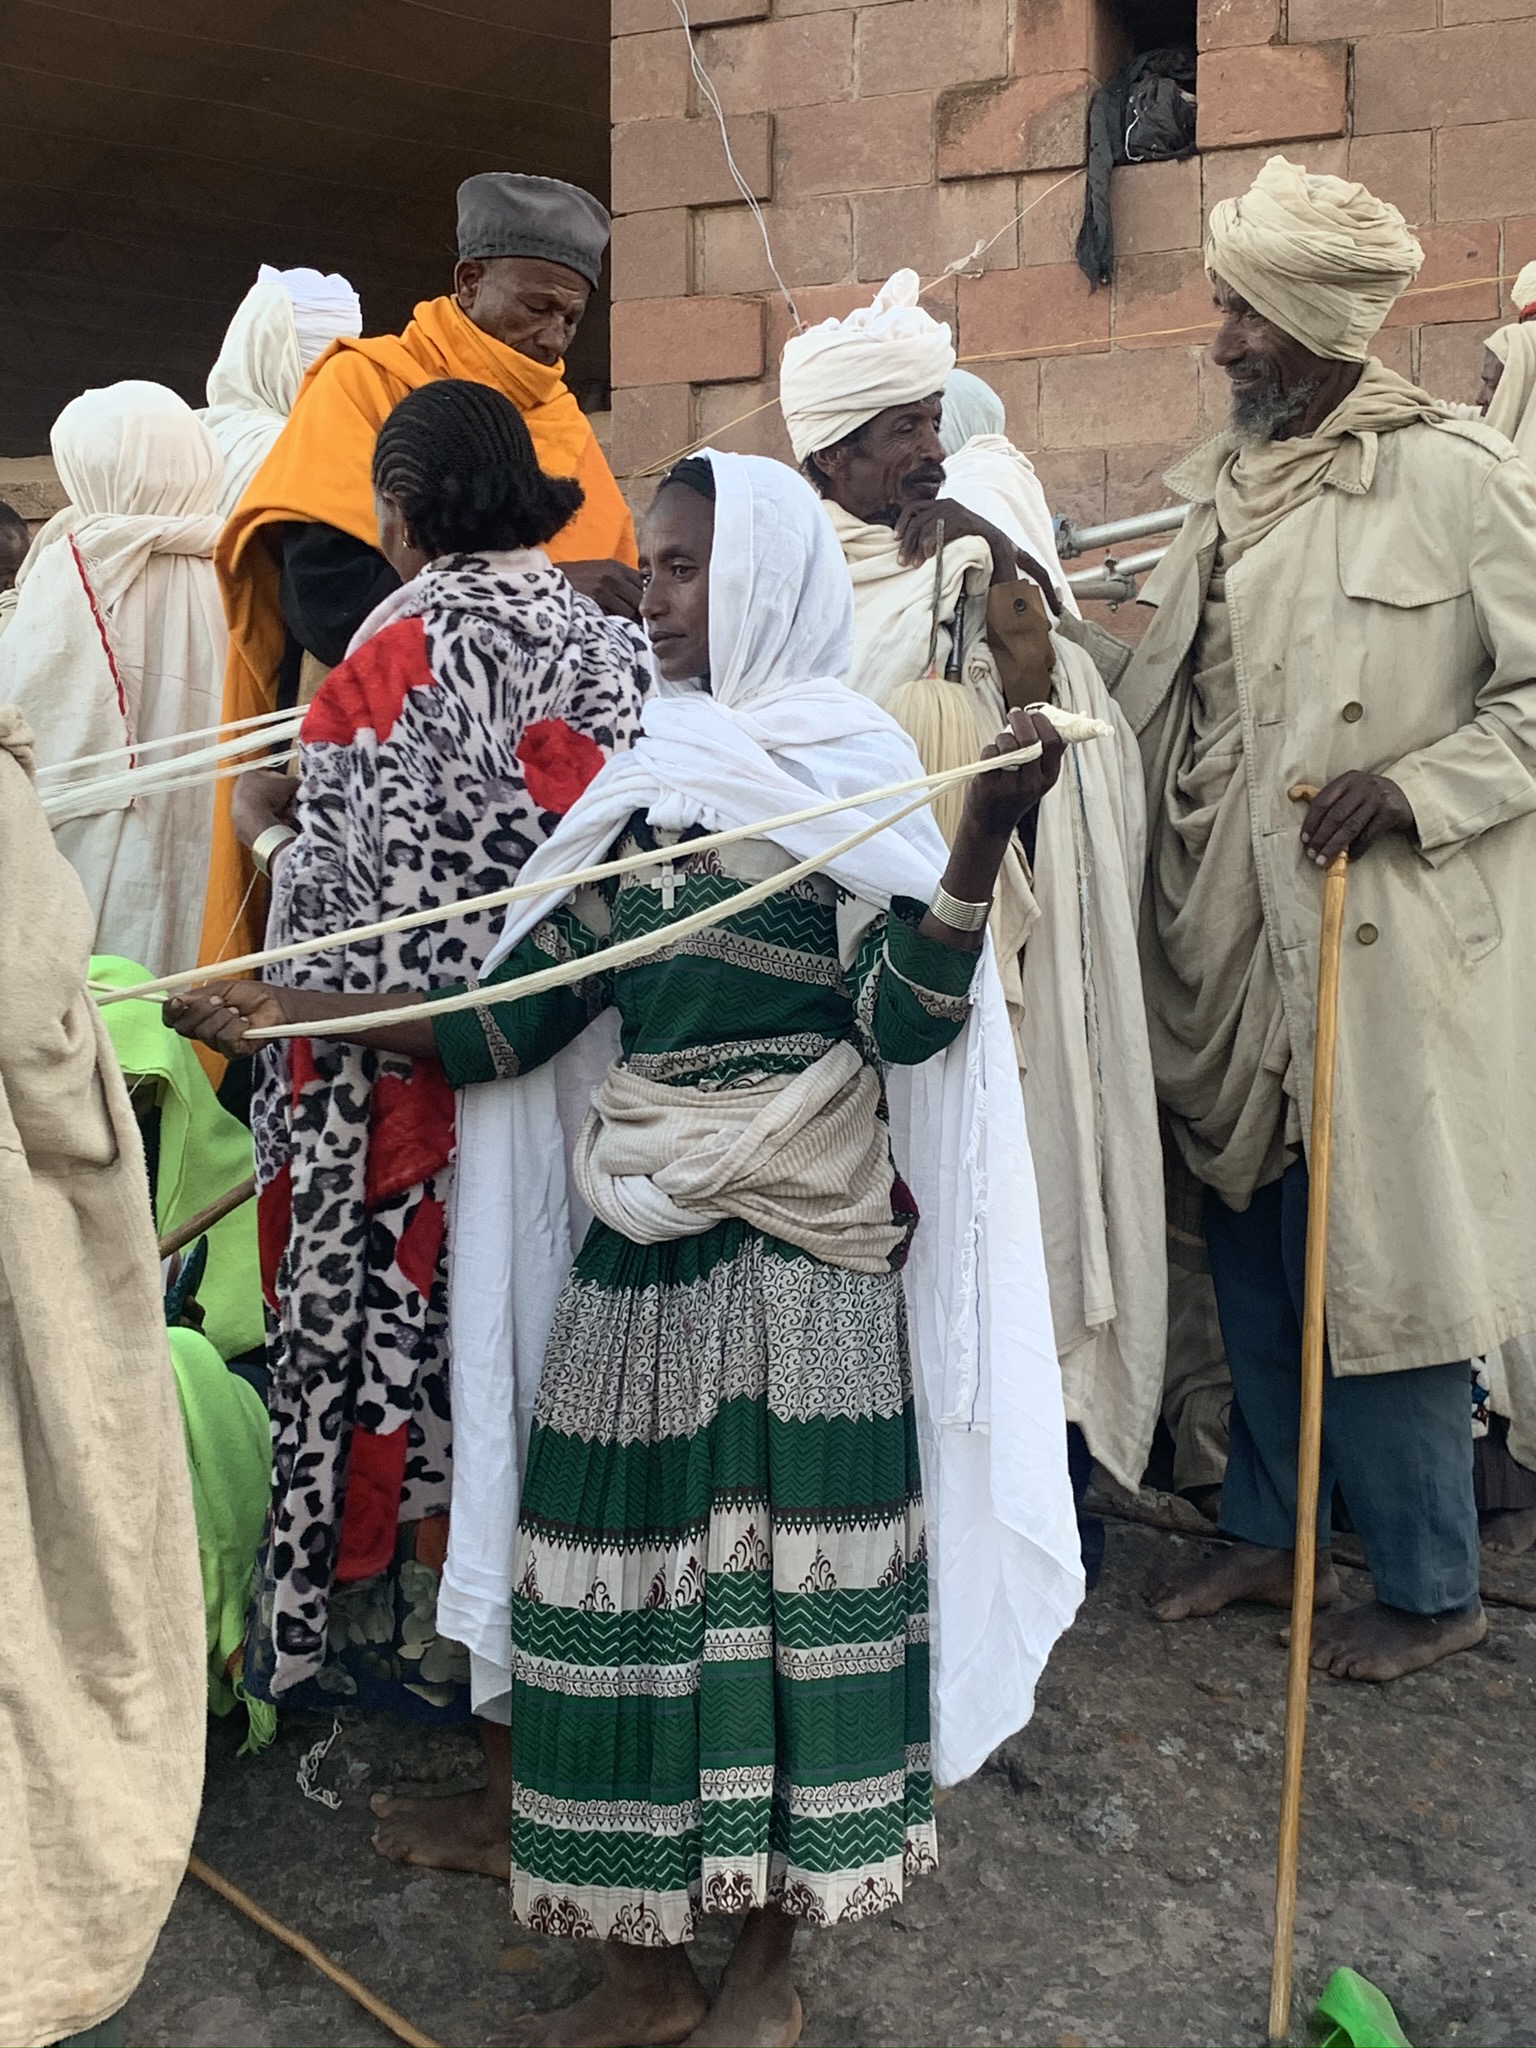 Ceremonial Christmas weaving of fabric in Lalibela.  Image by and courtesy of Naomi Meulemans